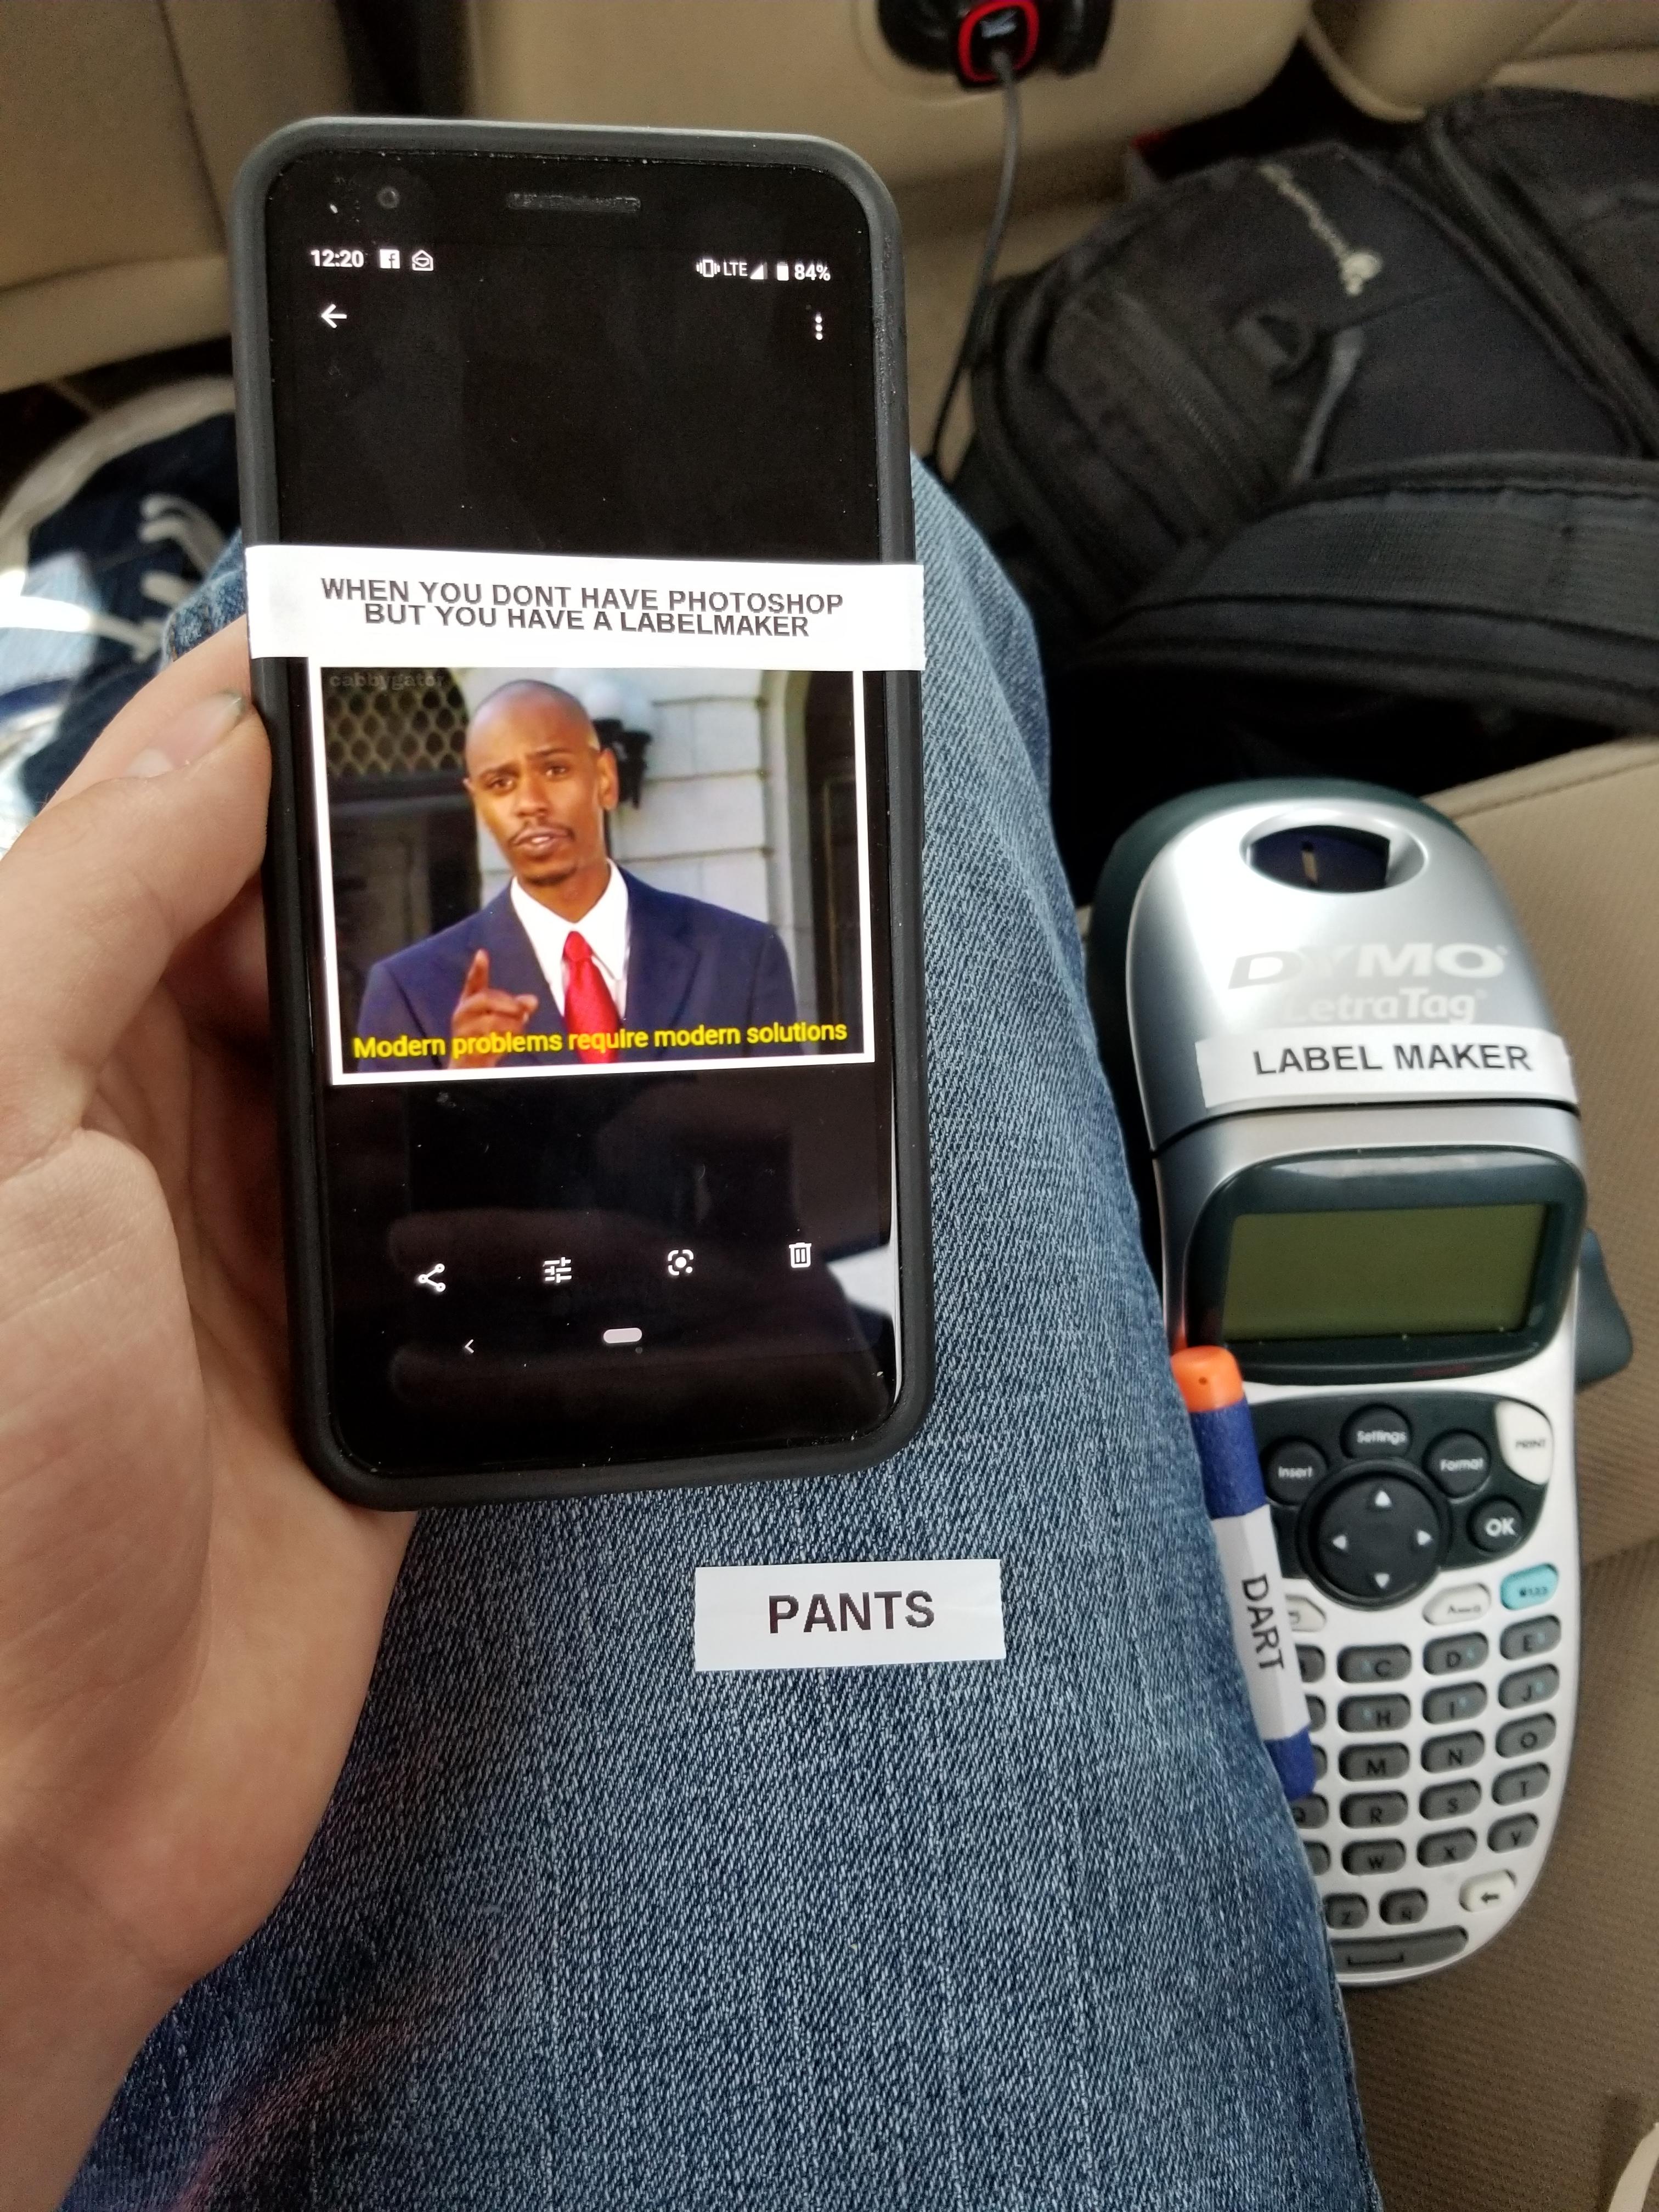 I bought a label maker for this joke